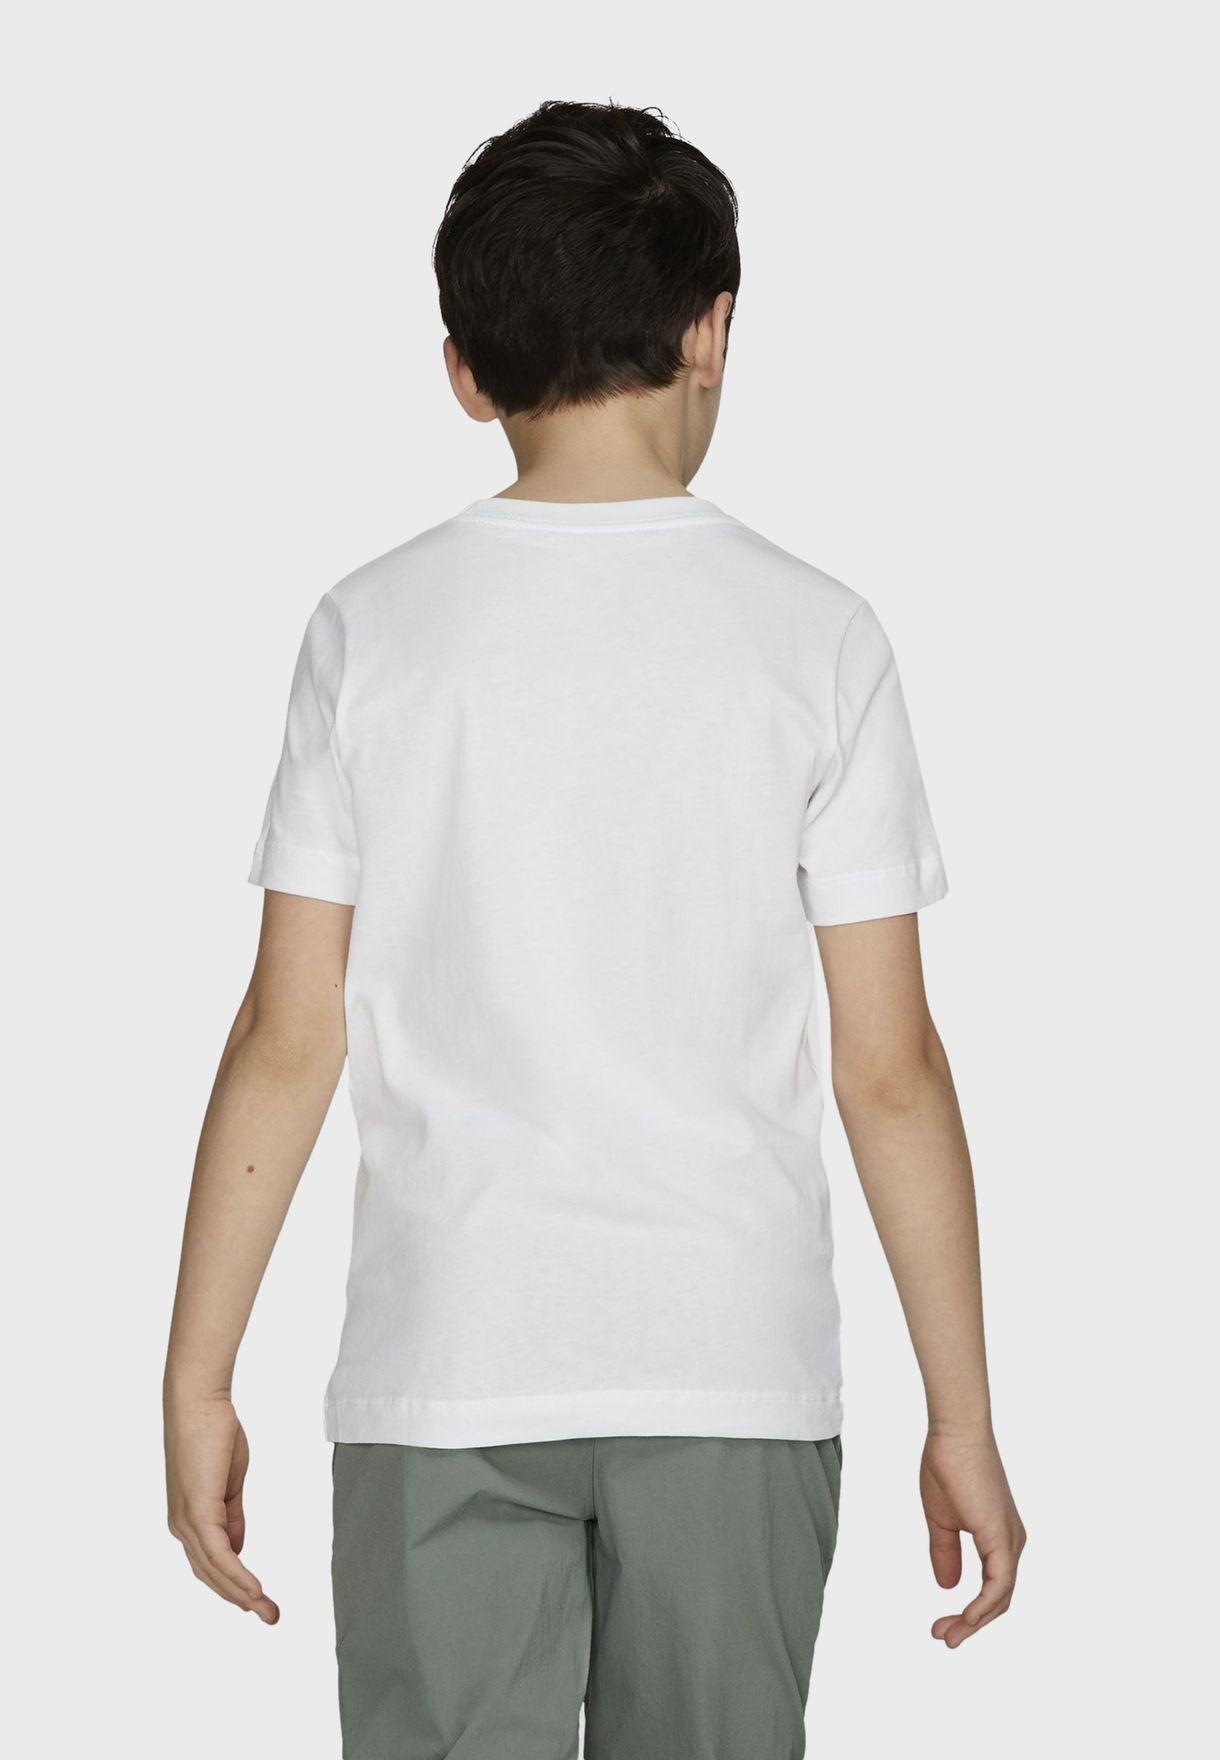 Youth NSW Futura Embroidered T-Shirt